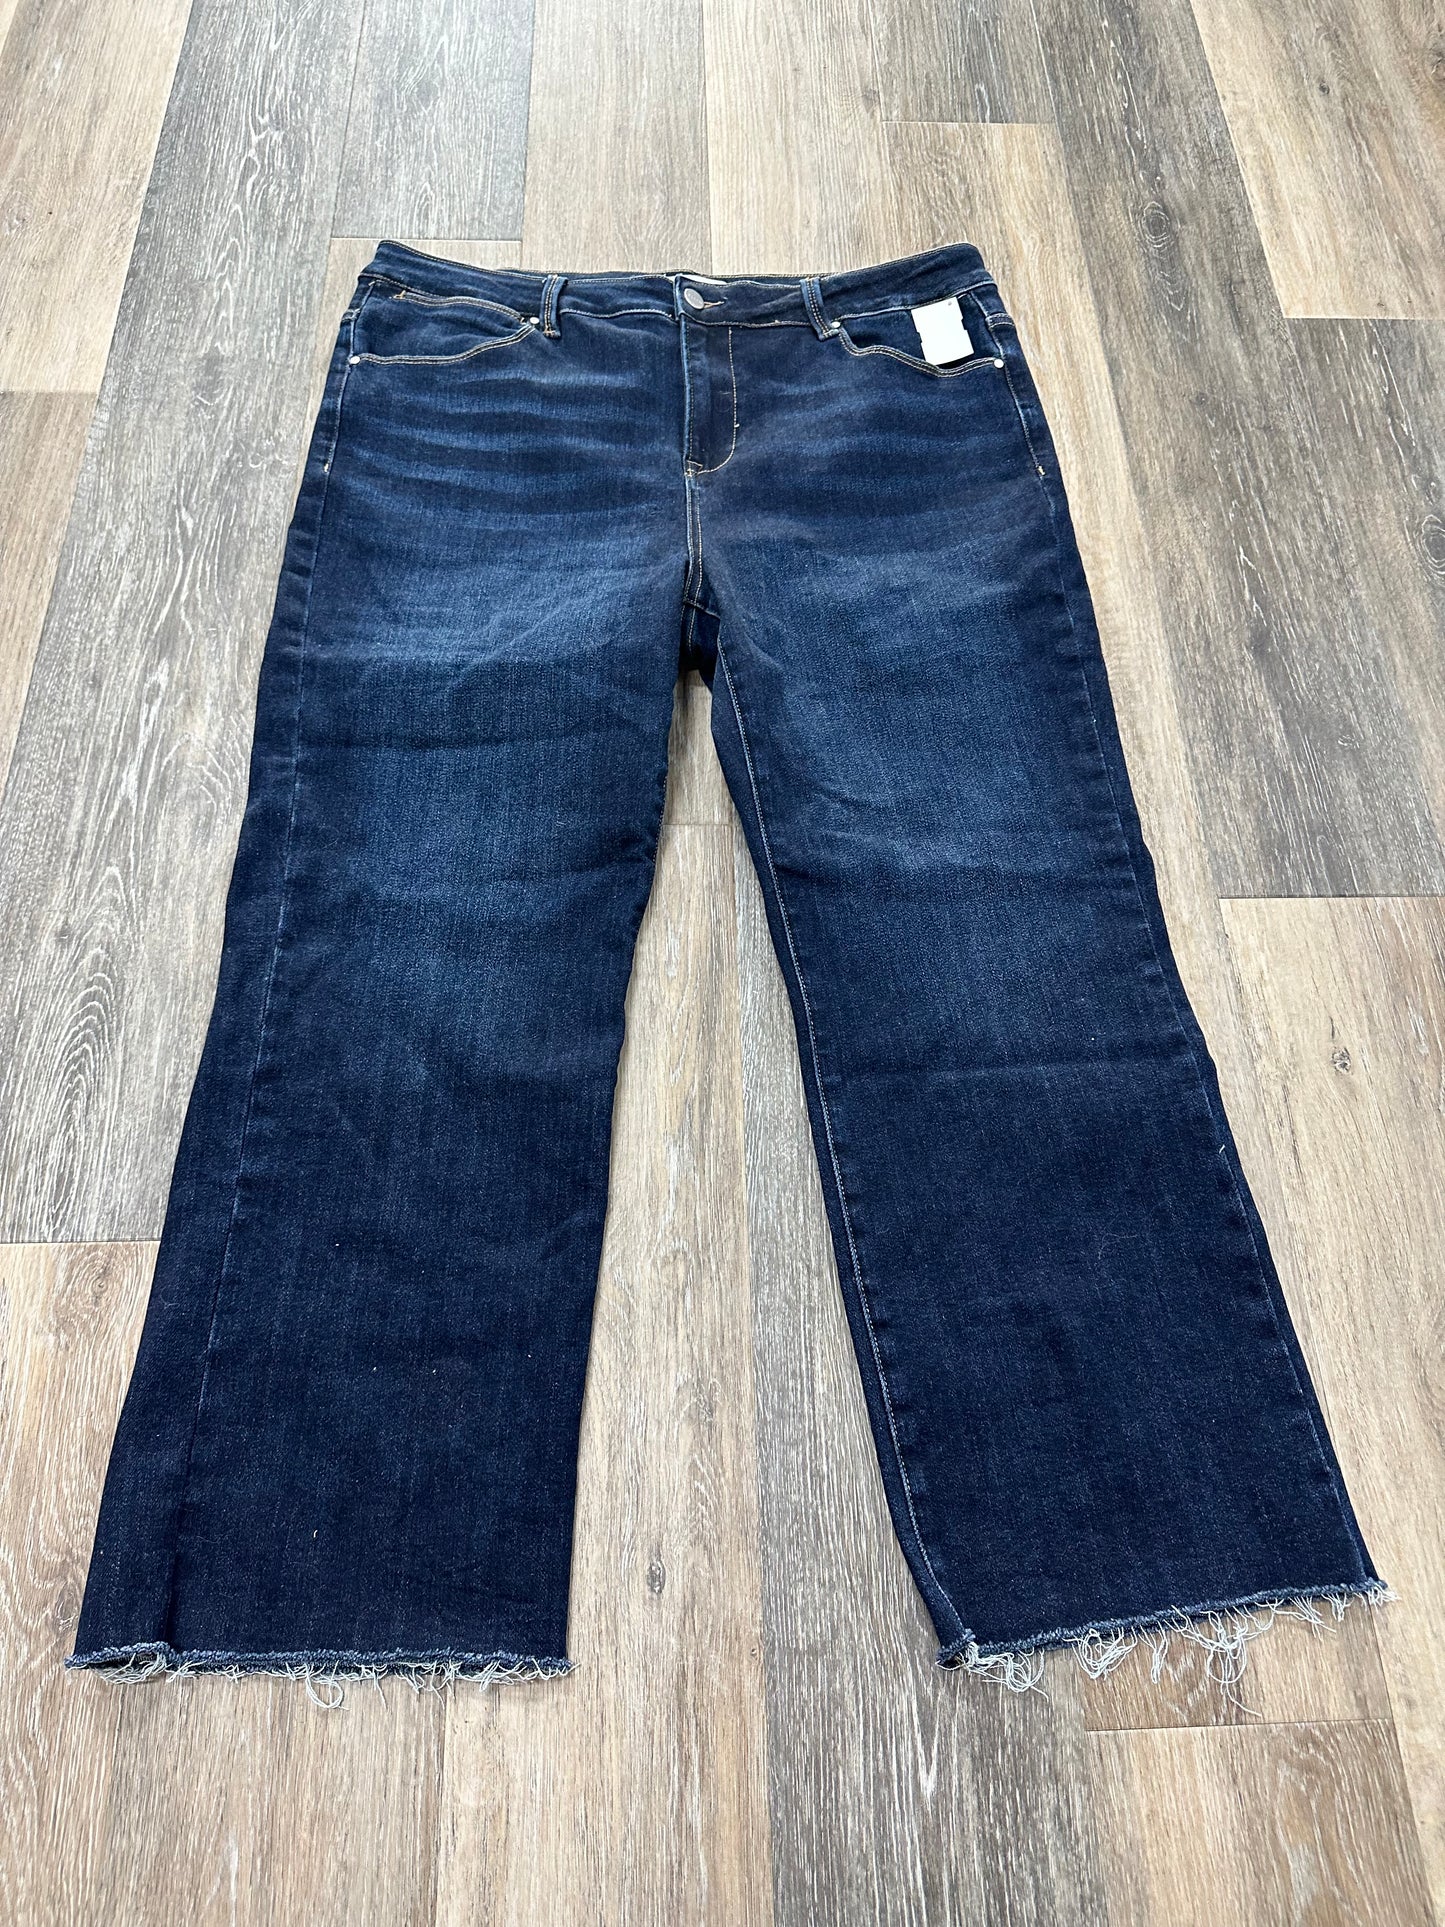 Jeans Straight By Risen  Size: 2x